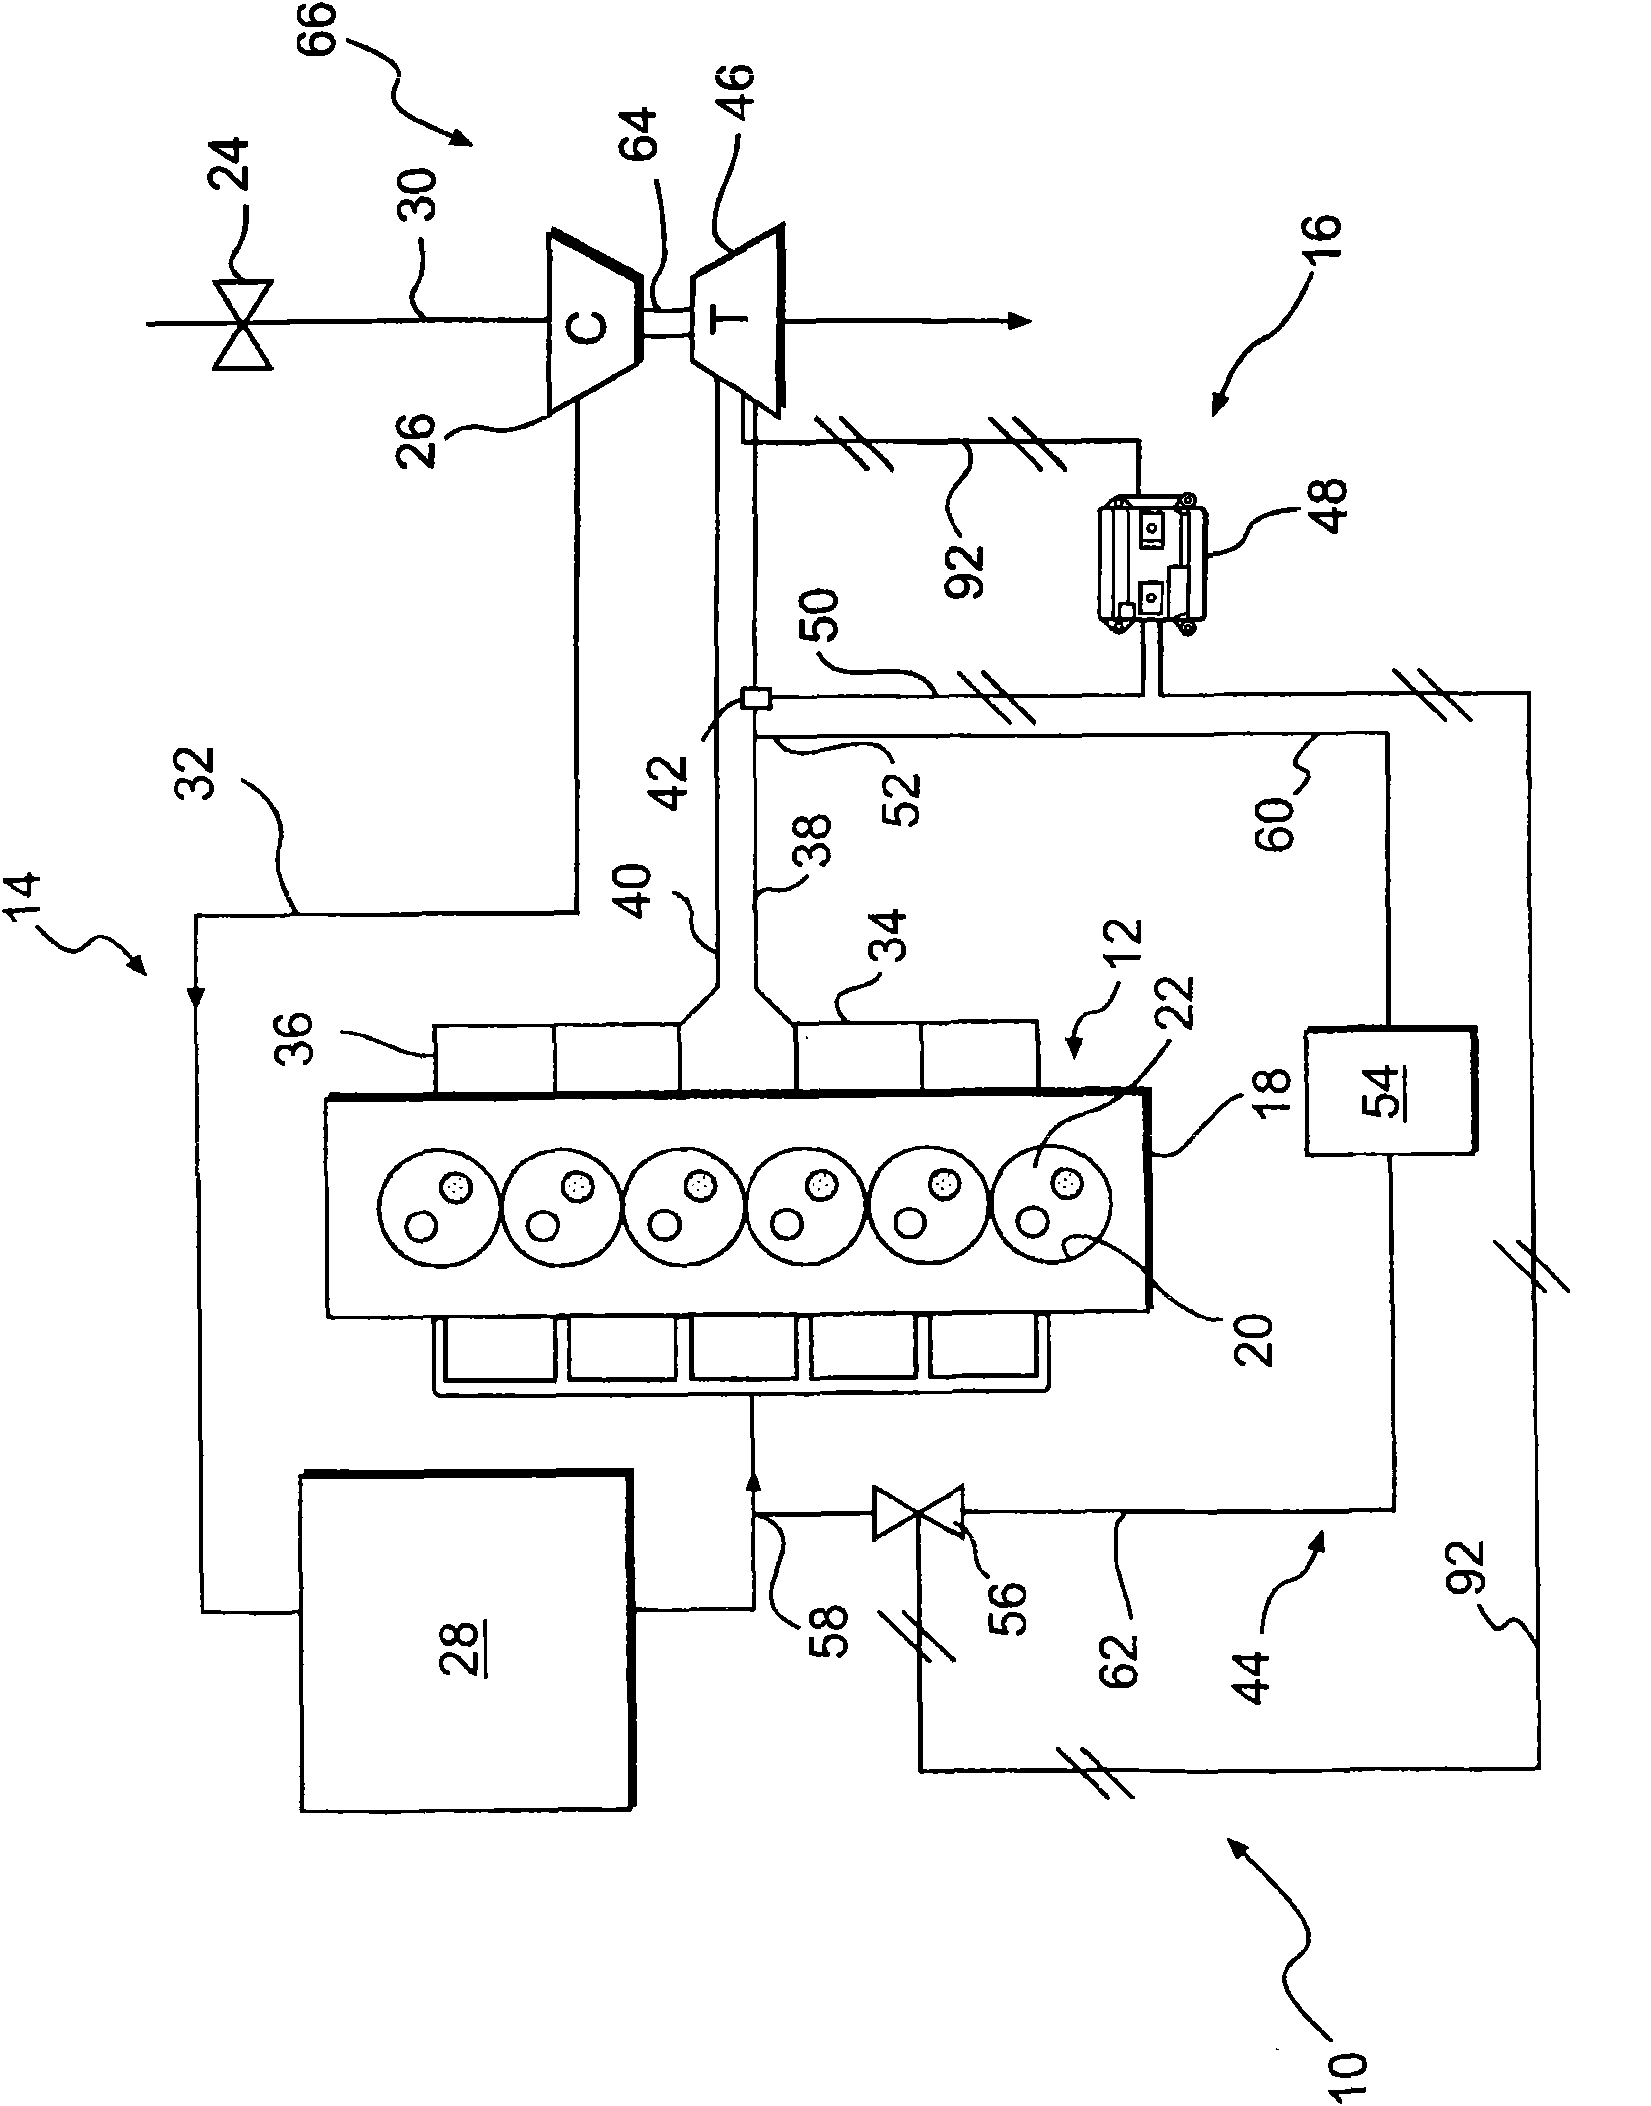 Exhaust gas turbocharger with 2 inflow channels connected by a valve